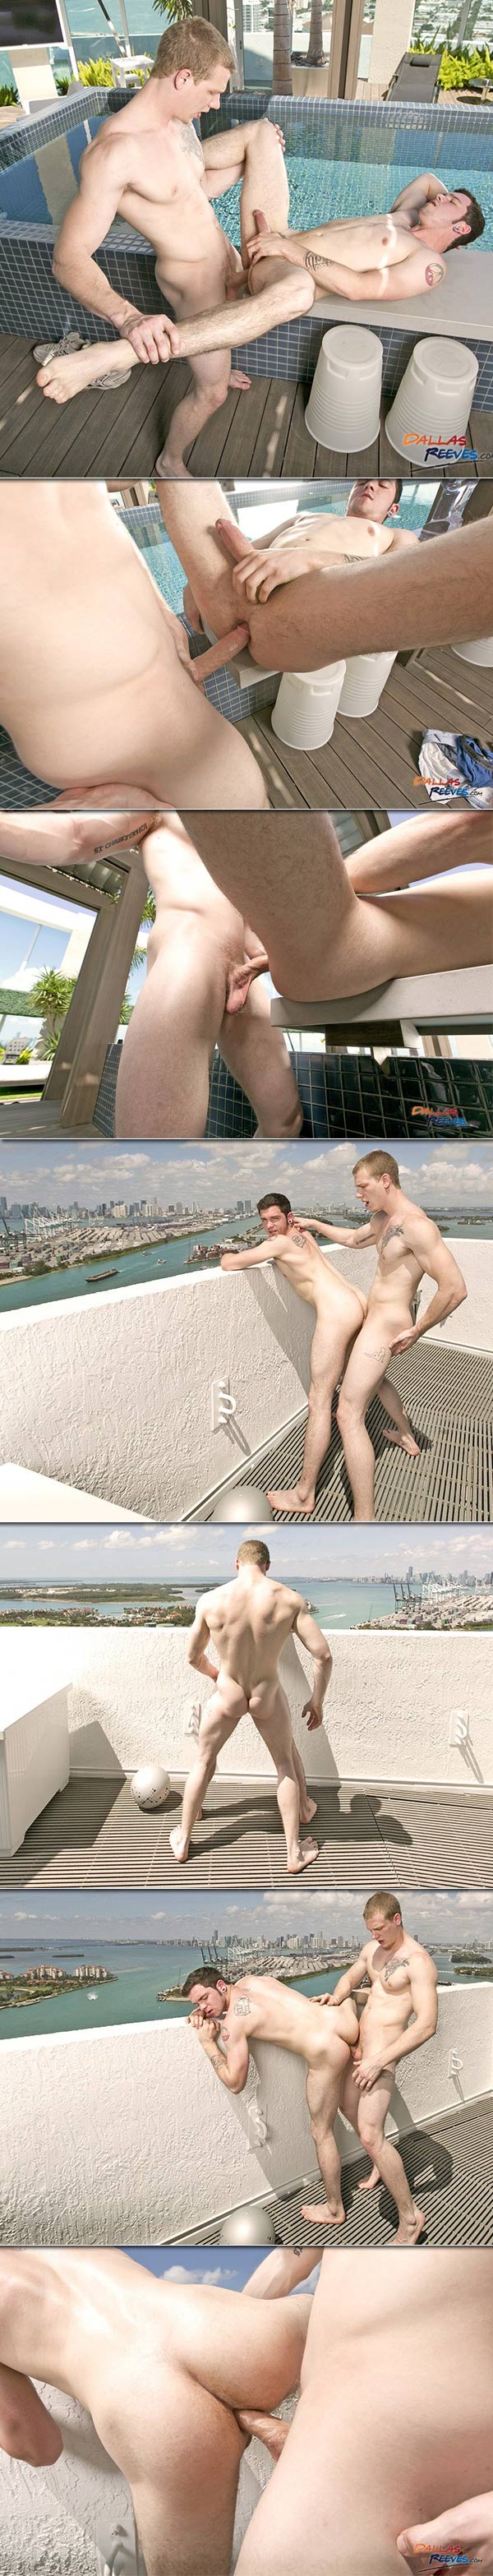 Johnny Forza & Robbie Rivers (Bareback Penthouse Pool Fuck) at DallasReeves.com